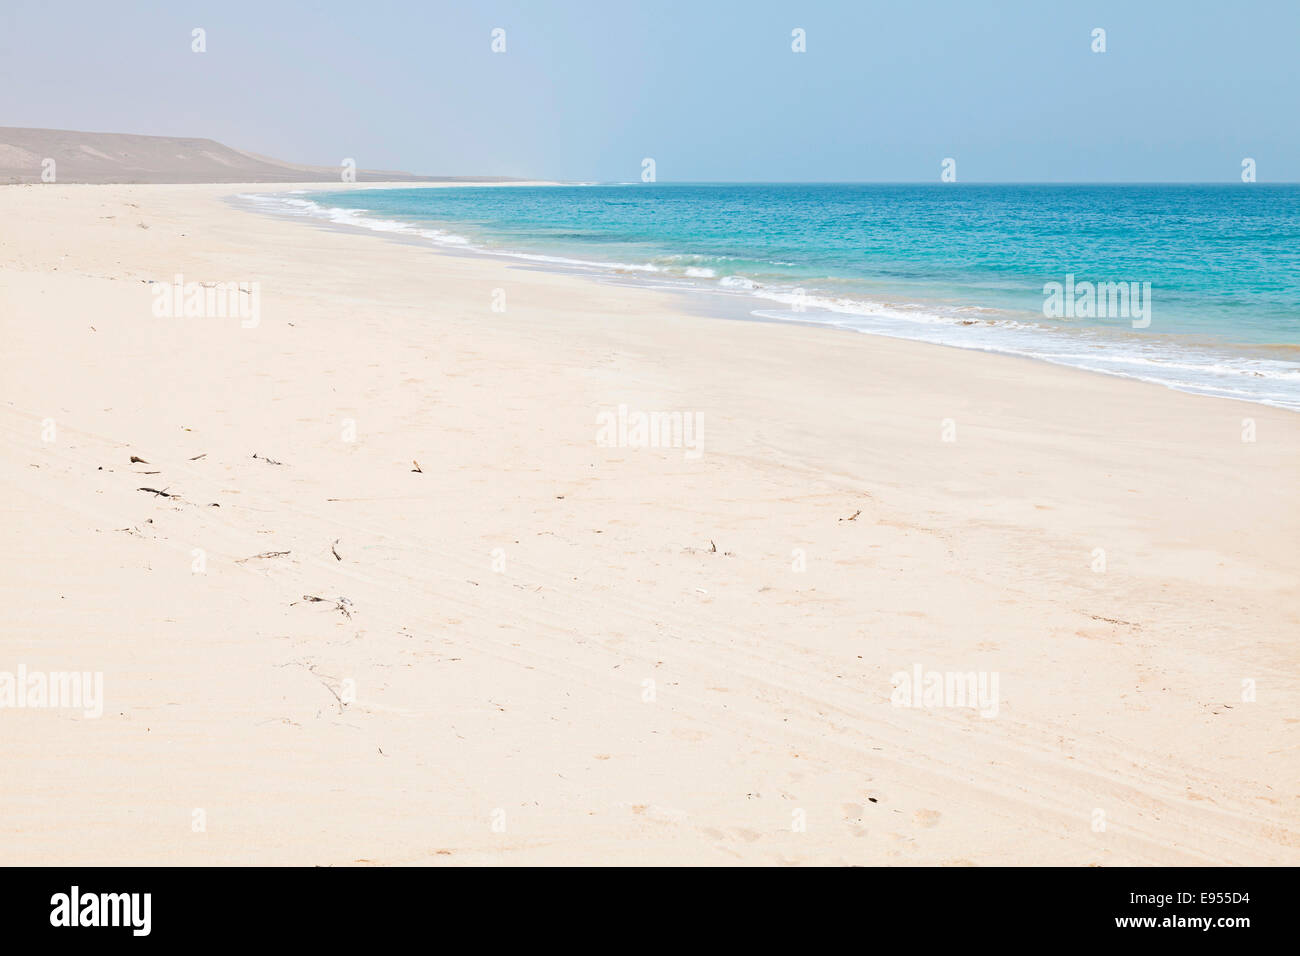 The long and wide beach of Praia de Curral Velho in the south of the island of Boa Vista, Cape Verde, Republic of Cabo Verde Stock Photo